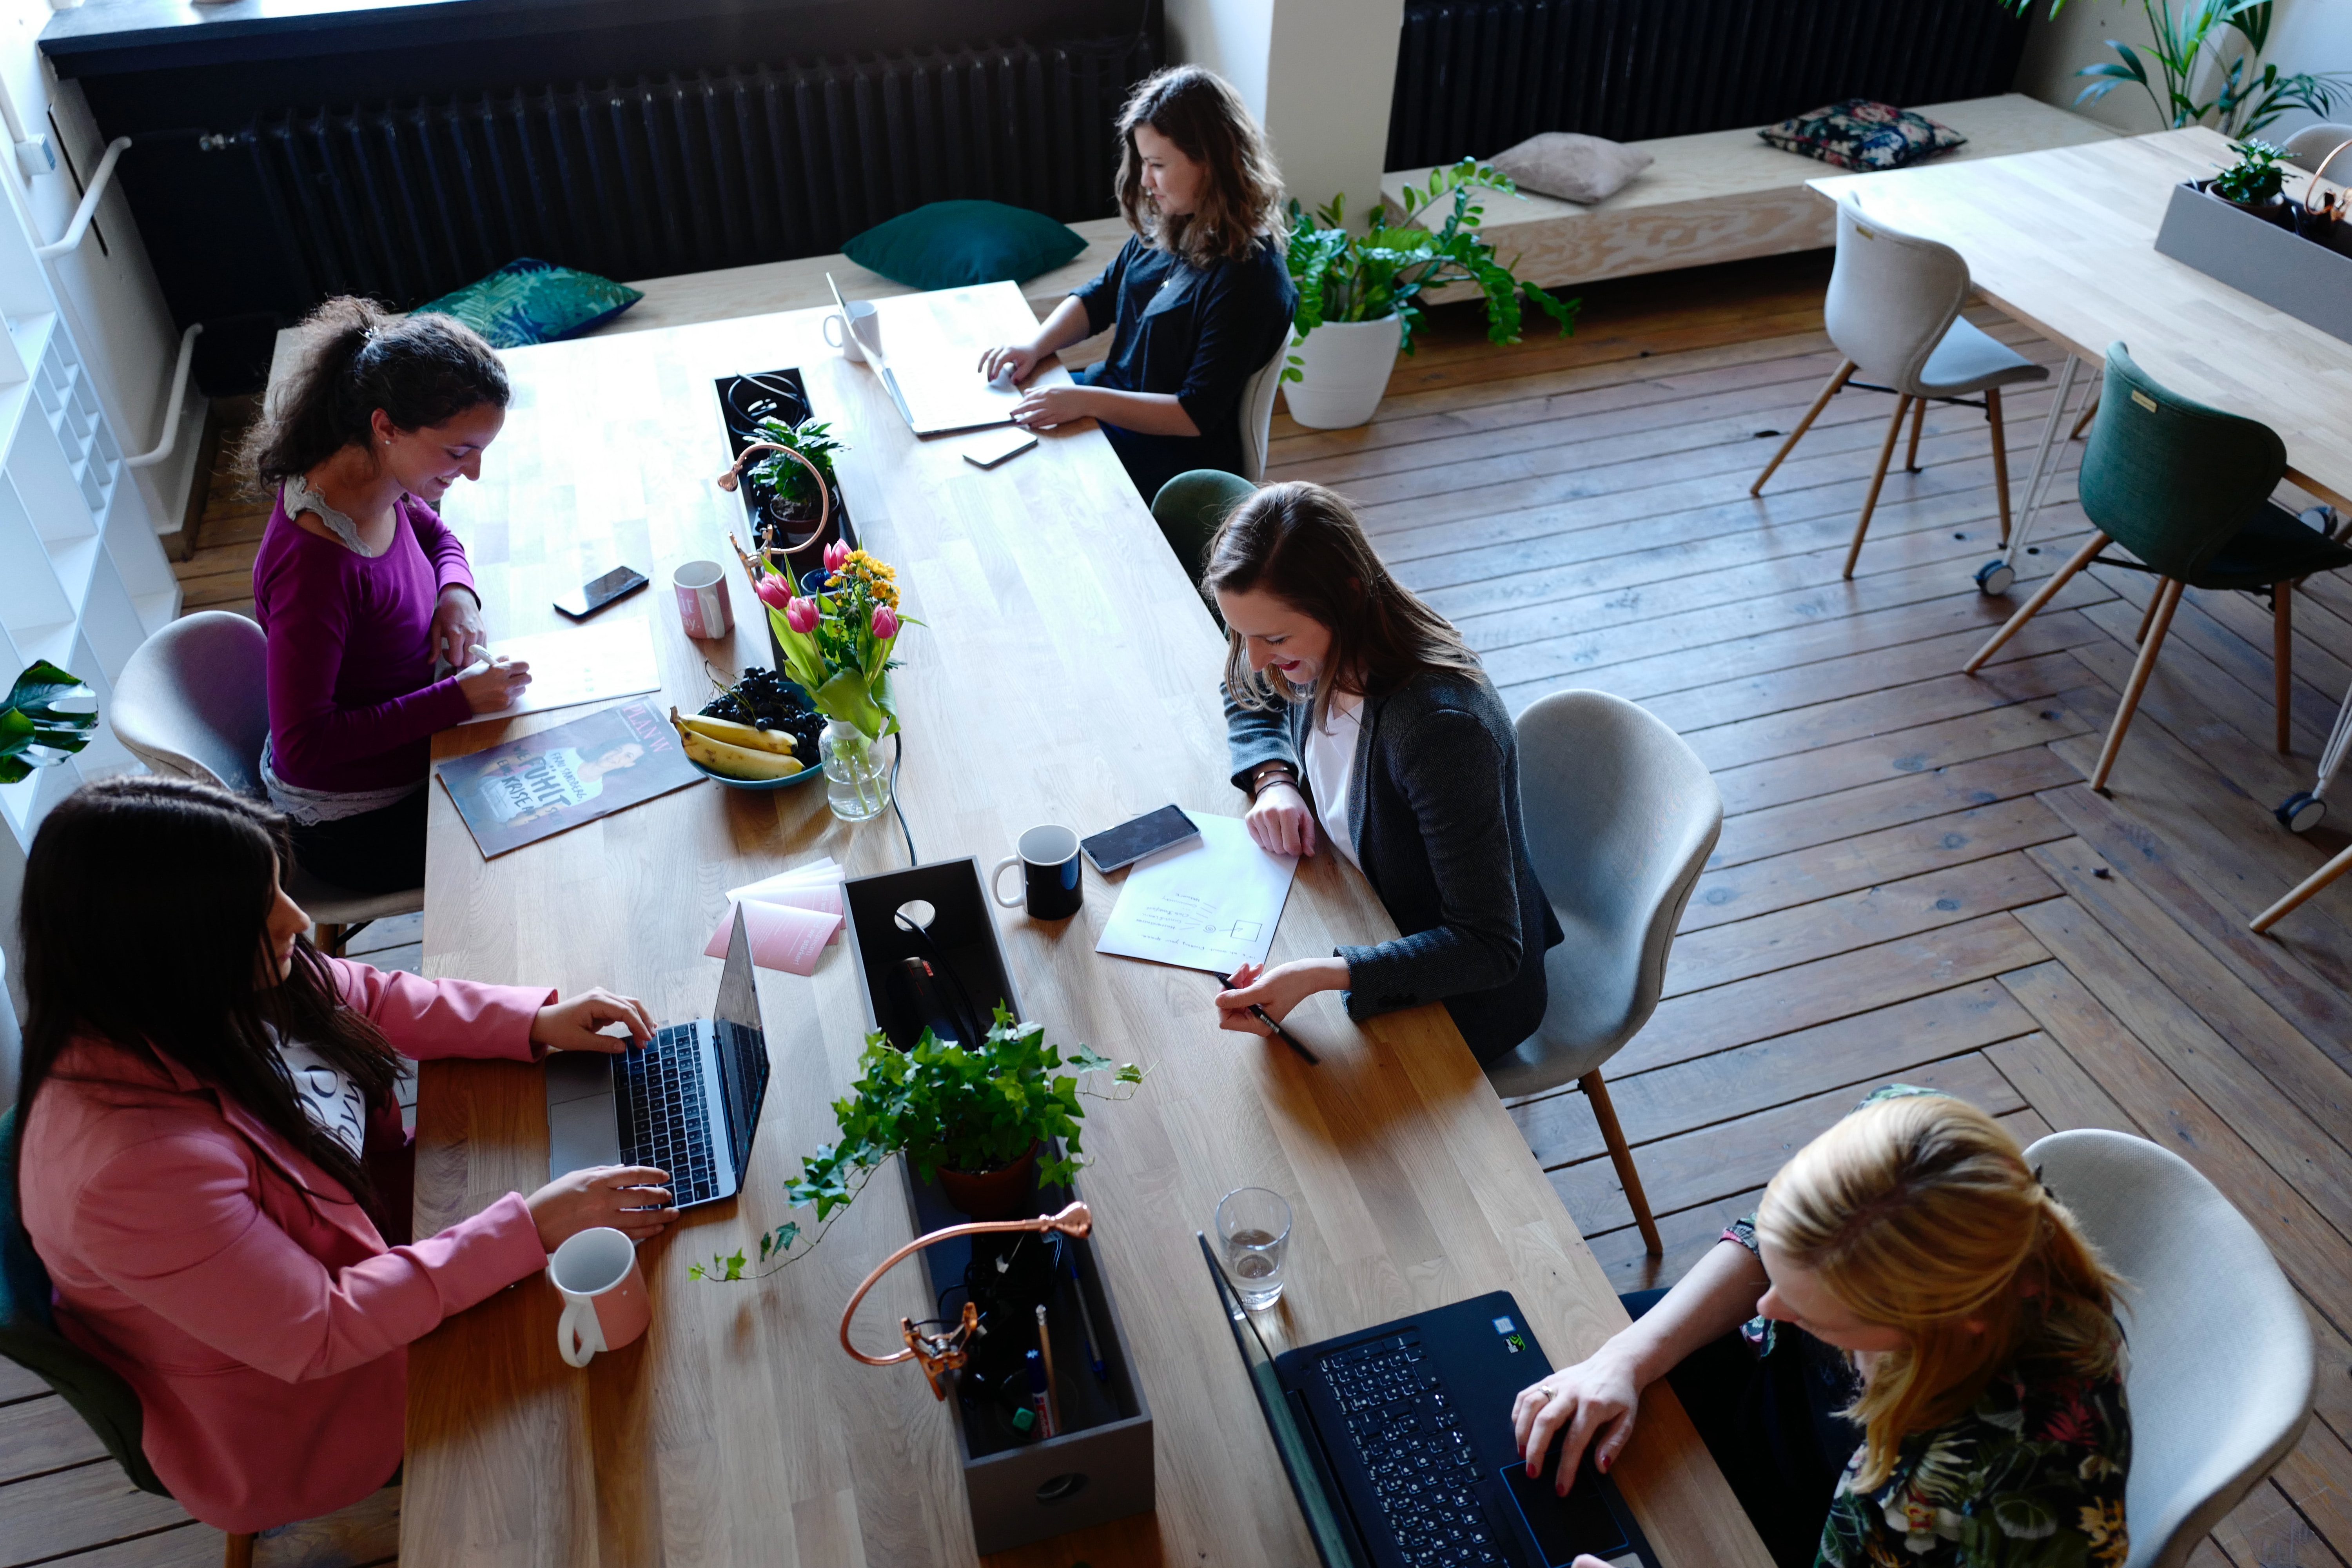 Overturning a Man’s World: How Coworking Supports Women - Part 2